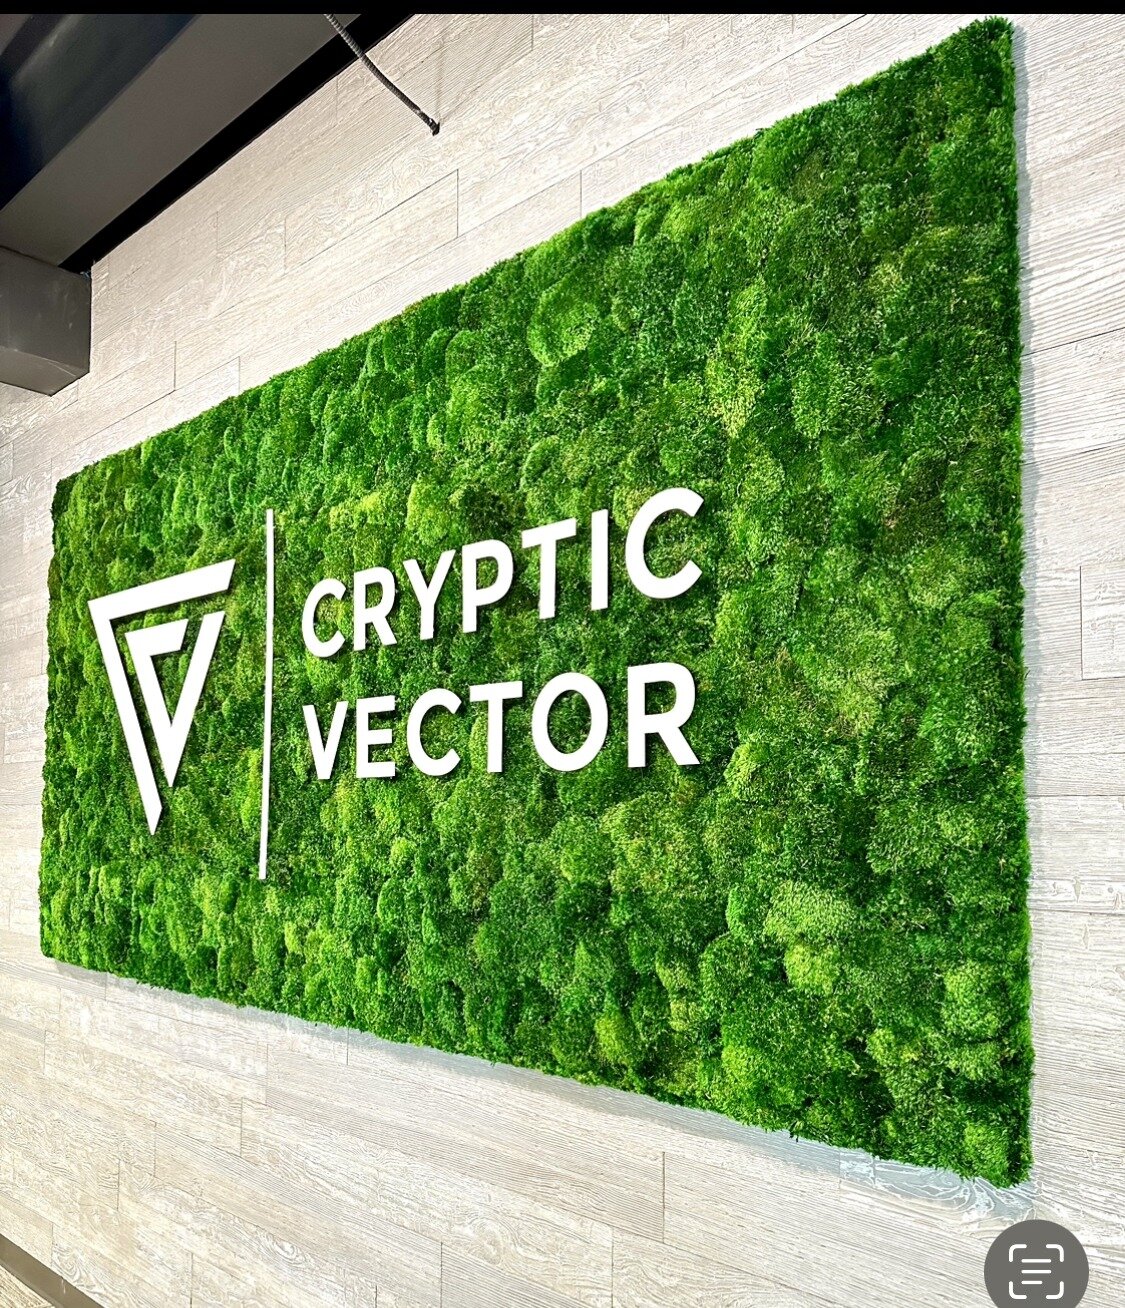 Looking for a green wall that incorporates your logo? We can take care of your signage needs! We work with wood, acrylic, brushed aluminum and LED.

Seen here are a few examples of white acrylic signage - it bursts off of our green walls! 🌿